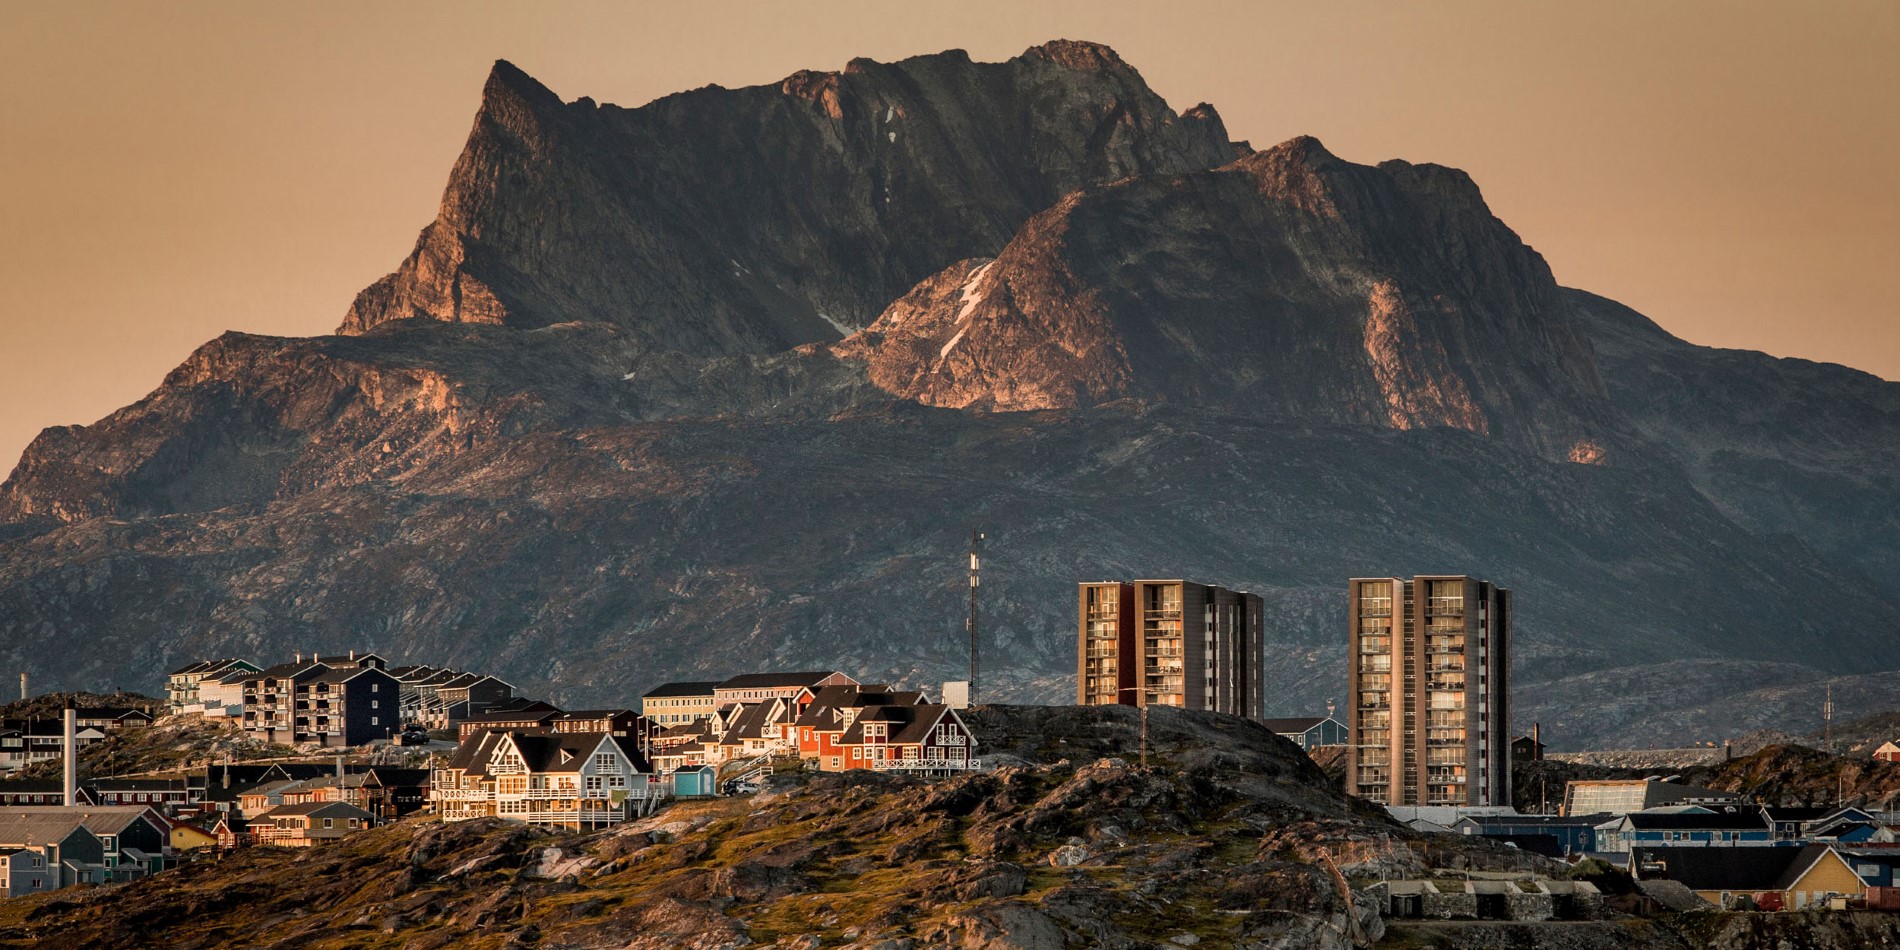 Nuuk with the mountain Sermitsiaq in the background